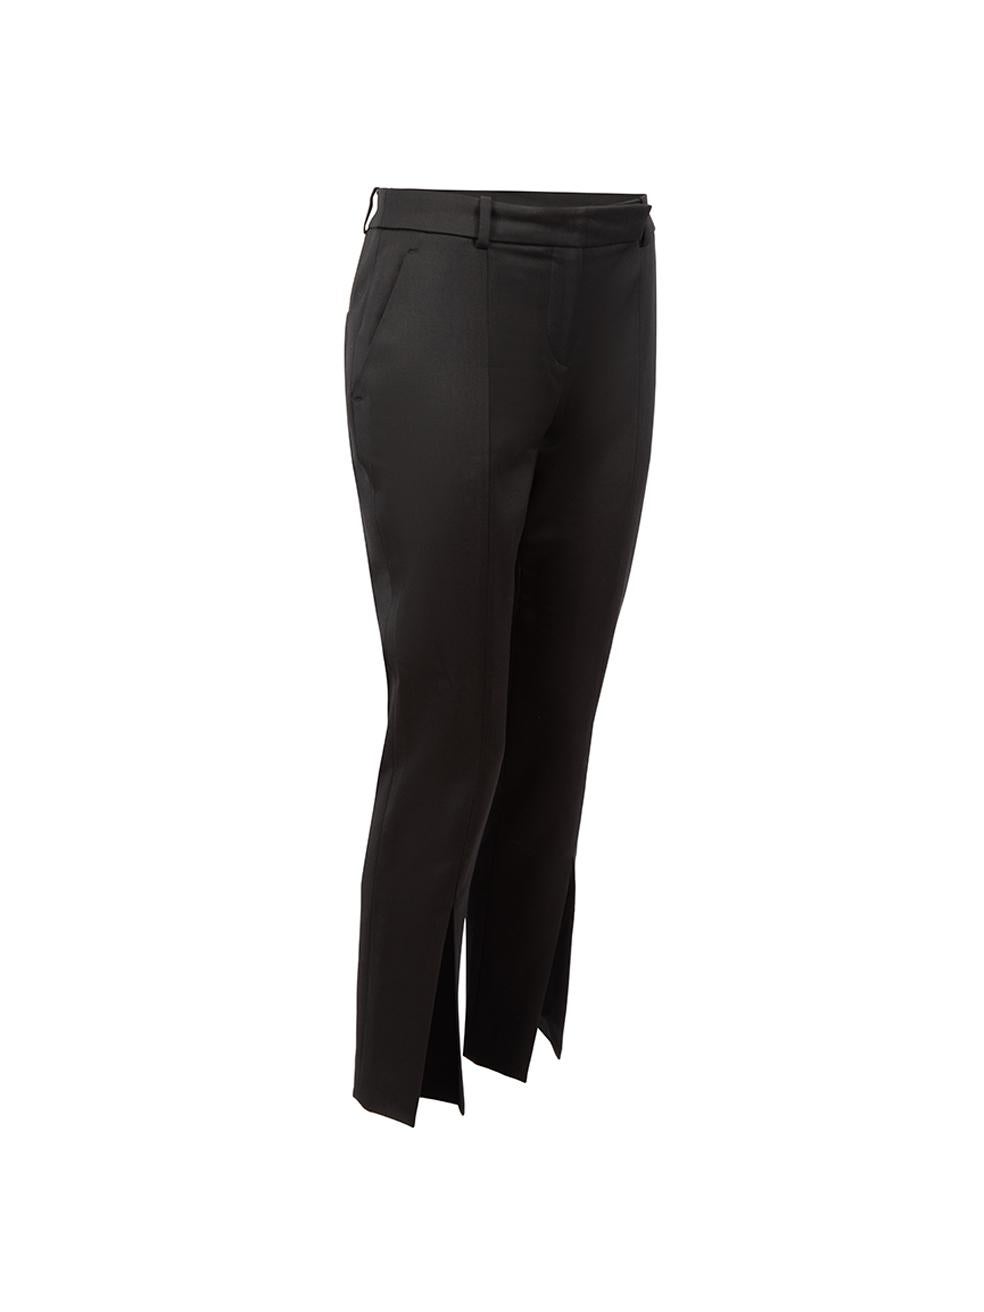 CONDITION is Very good. Hardly any visible wear to trousers is evident other than some loose stitching to the right leg hem slit on this used Alexander McQueen designer resale item. 
 
 Details
  Black
 Wool
 Slim fit trousers
 Low rise
 Slit on leg